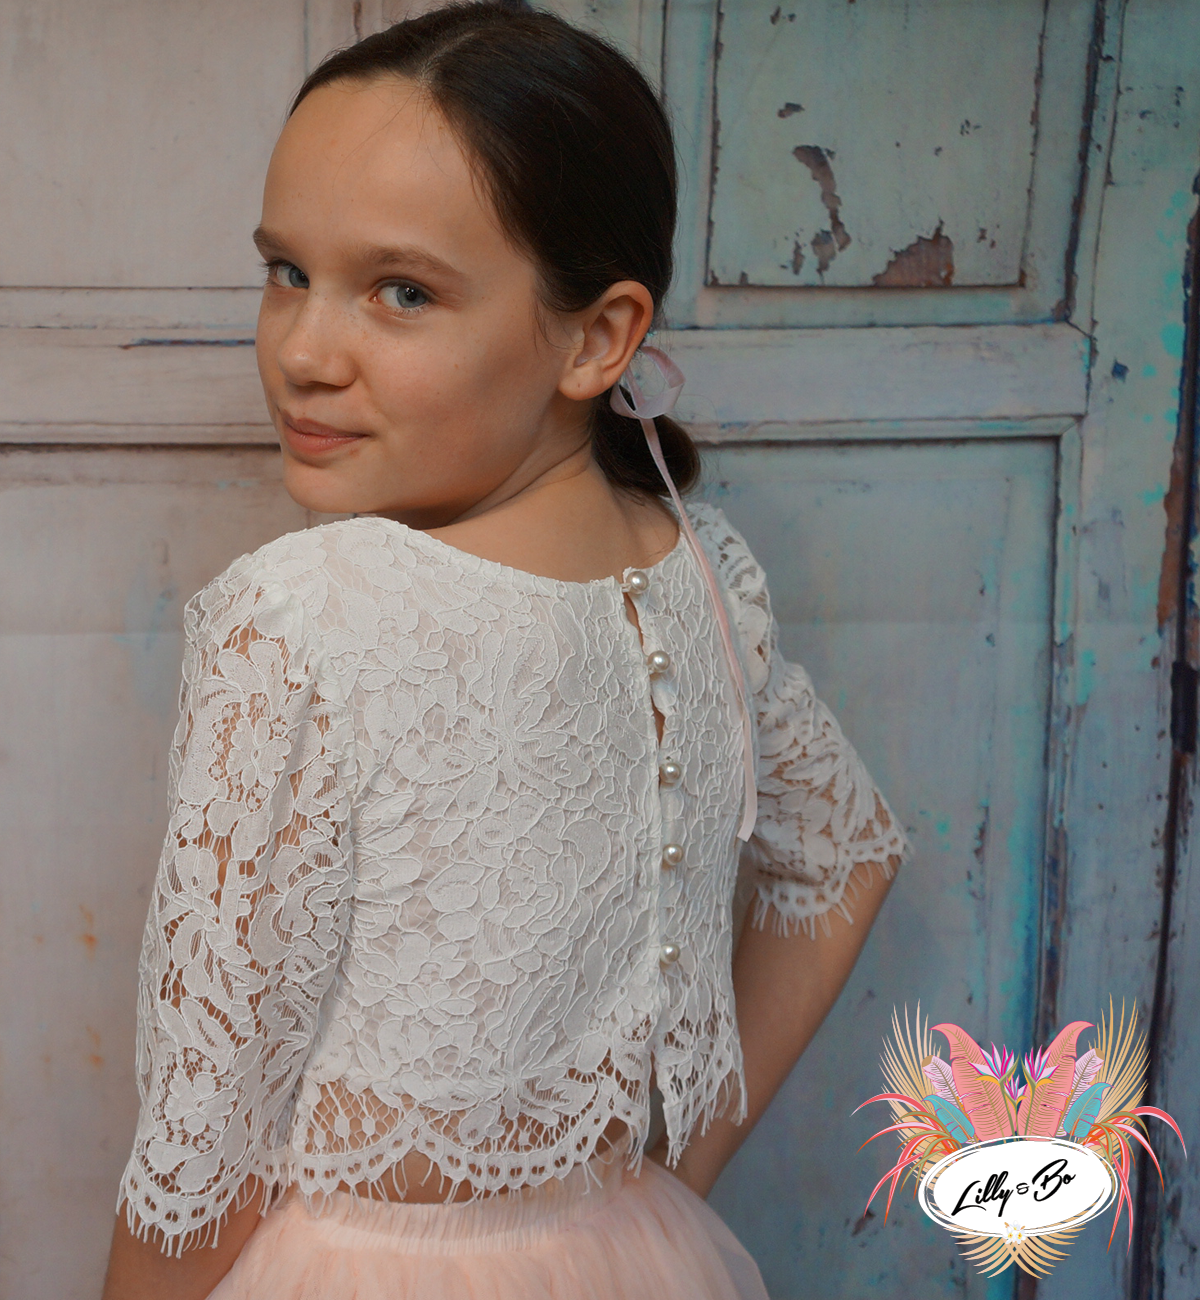 Ava in Blush ~ Luxurious Tulle & Lace Two-Piece